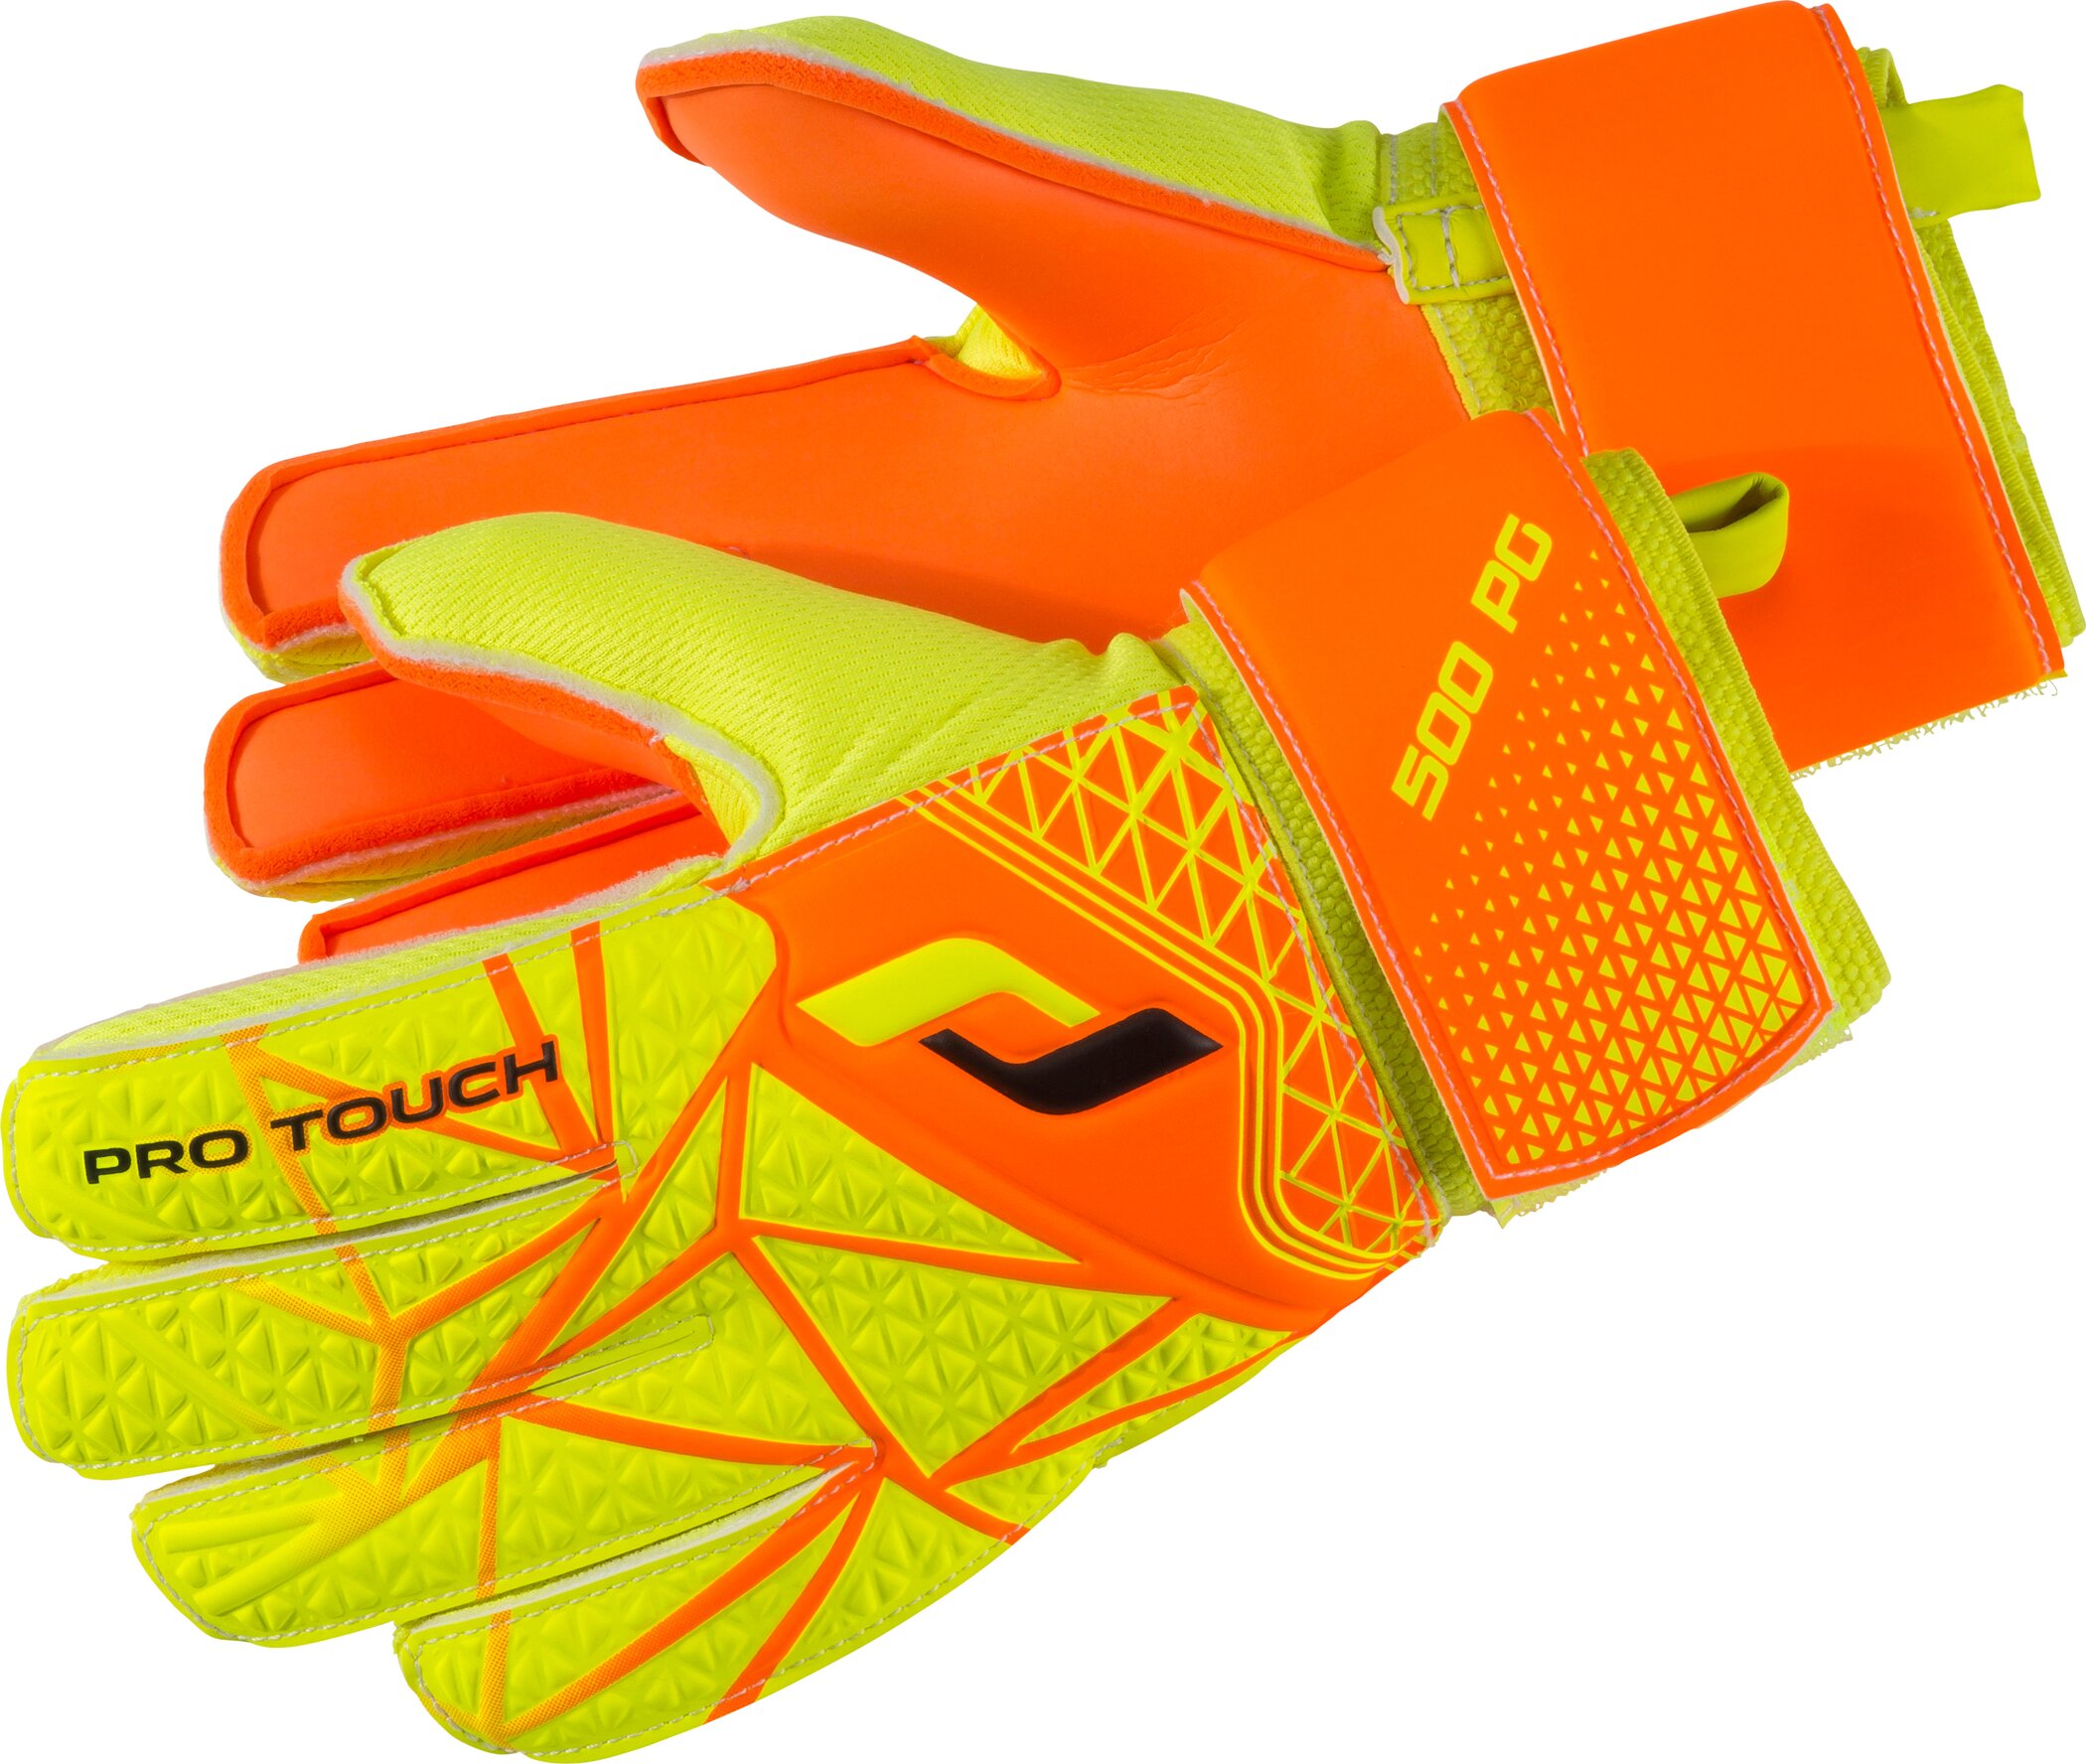 PRO TOUCH Kinder Torwarthandschuhe Force 500 PG